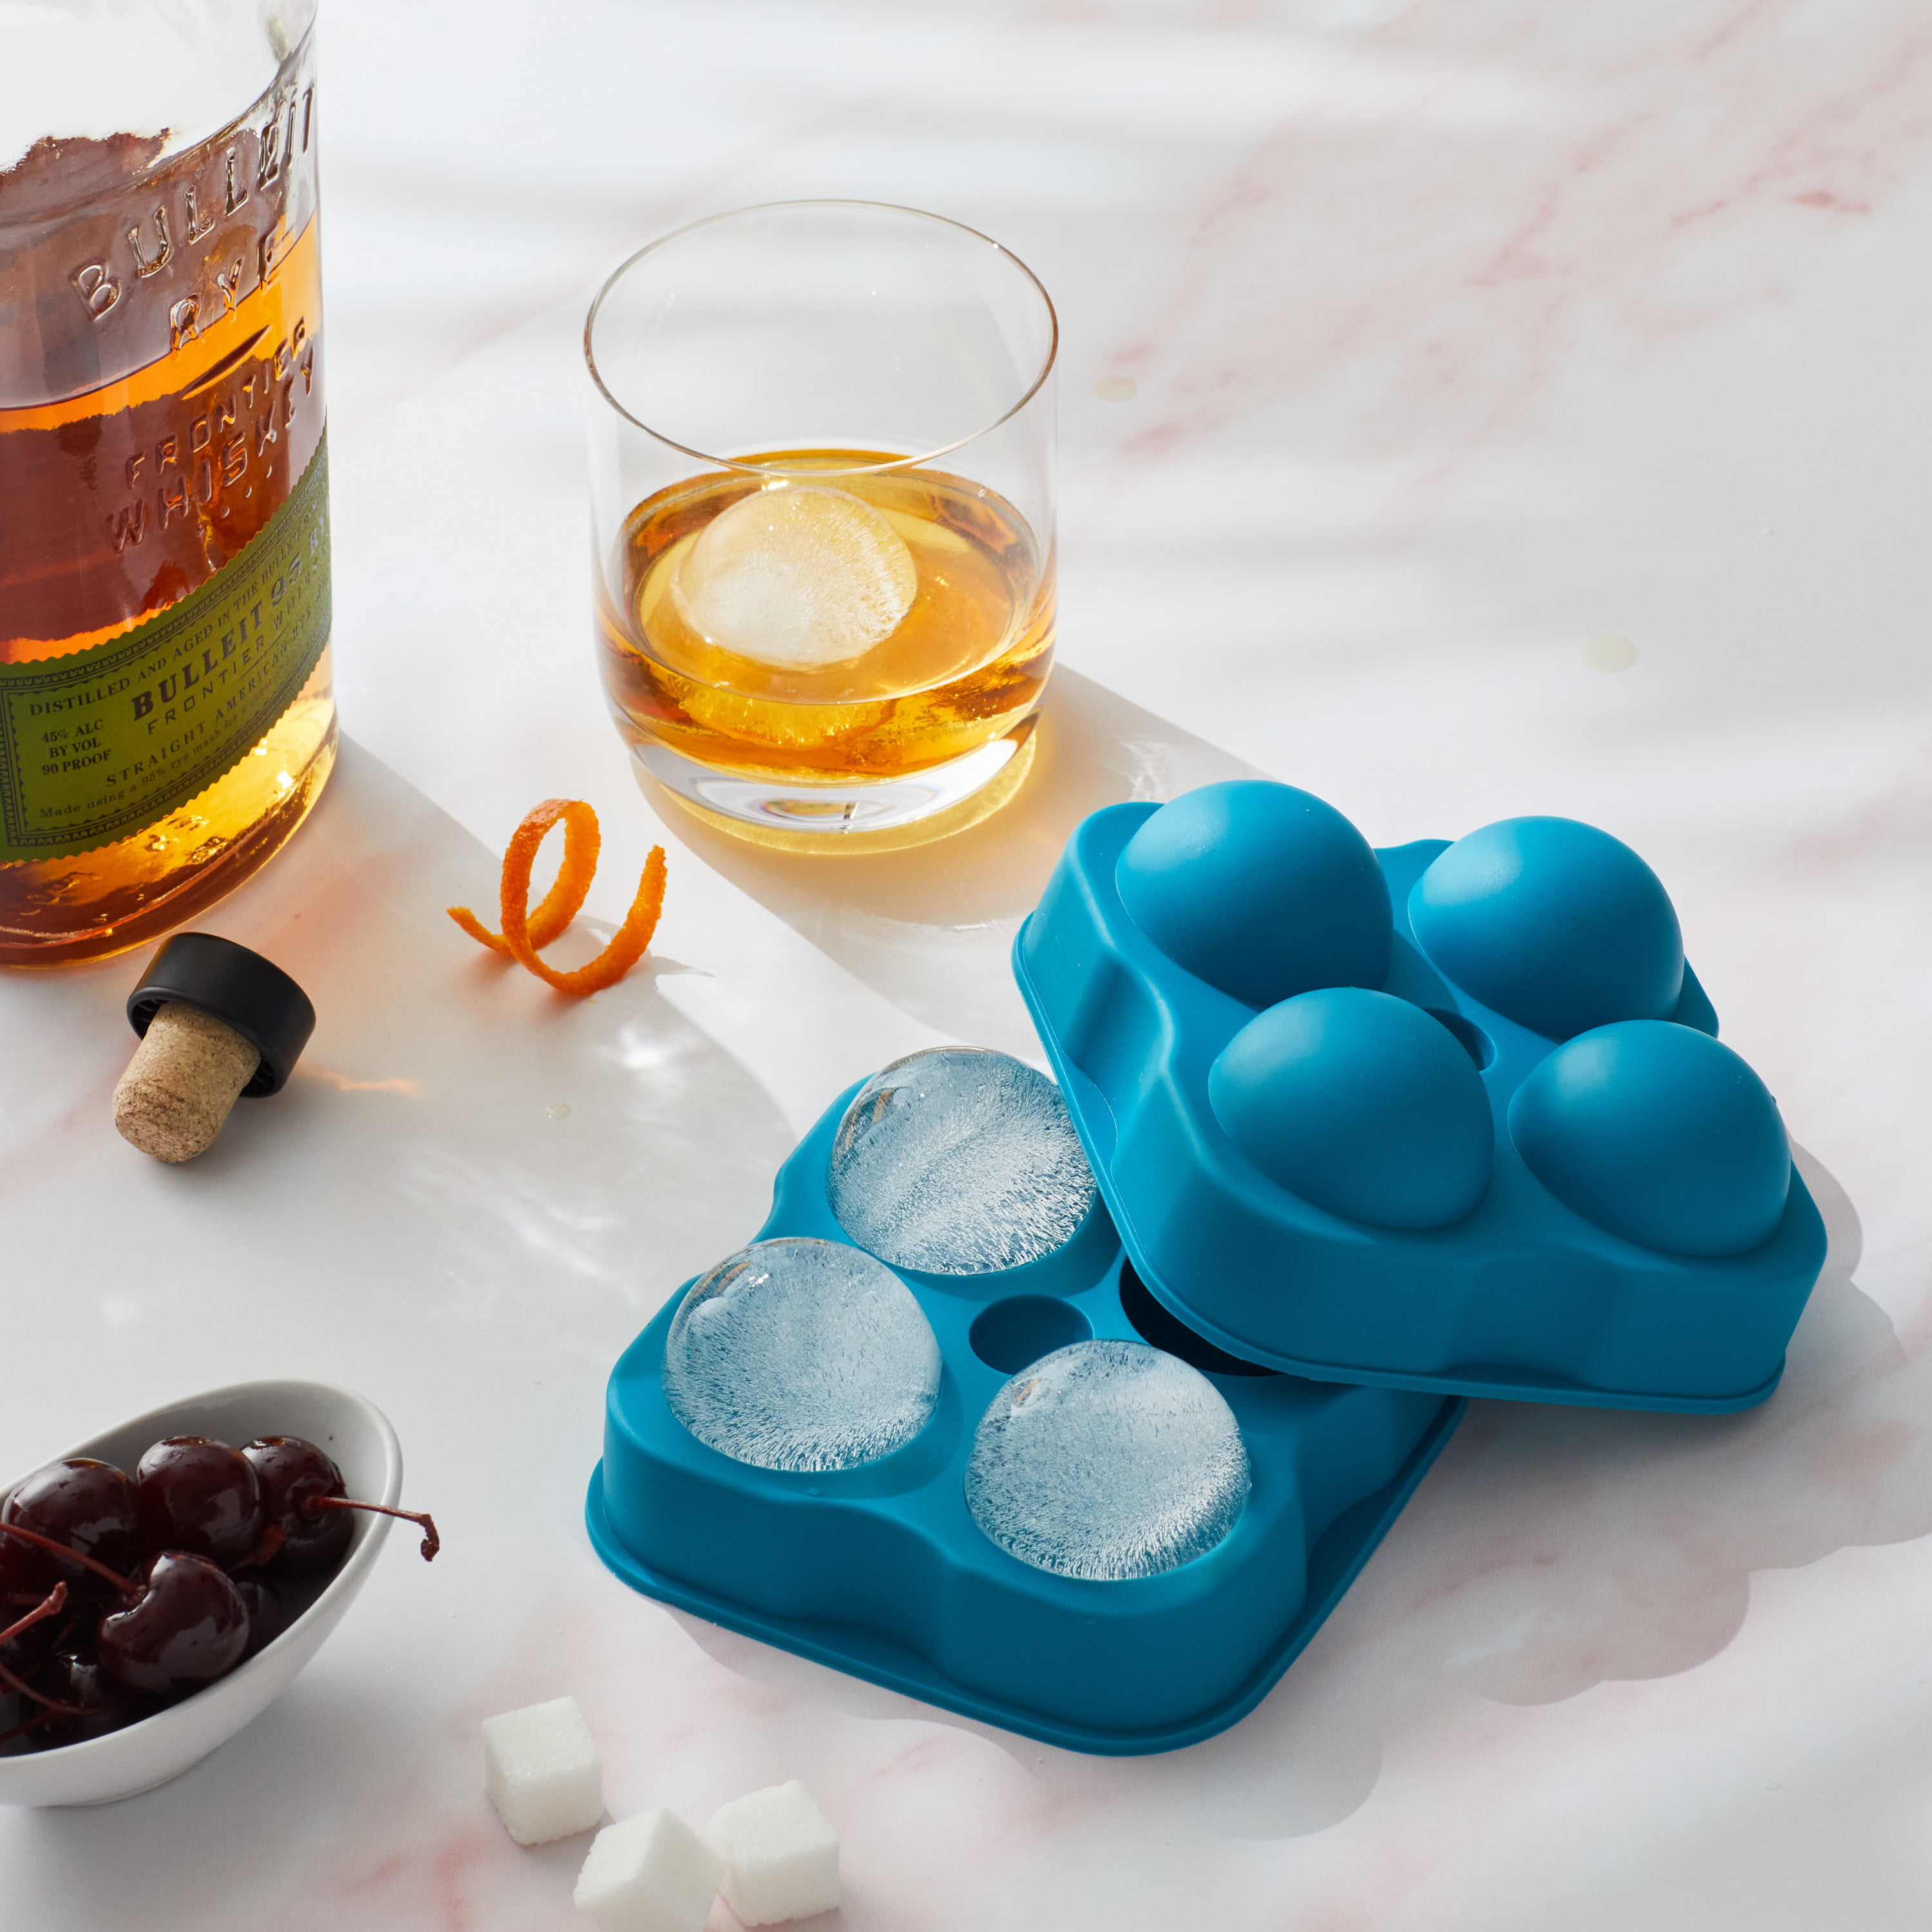 Houdini by Rabbit Silicone Ice Sphere Tray - Blue - Shop Bar Tools at H-E-B